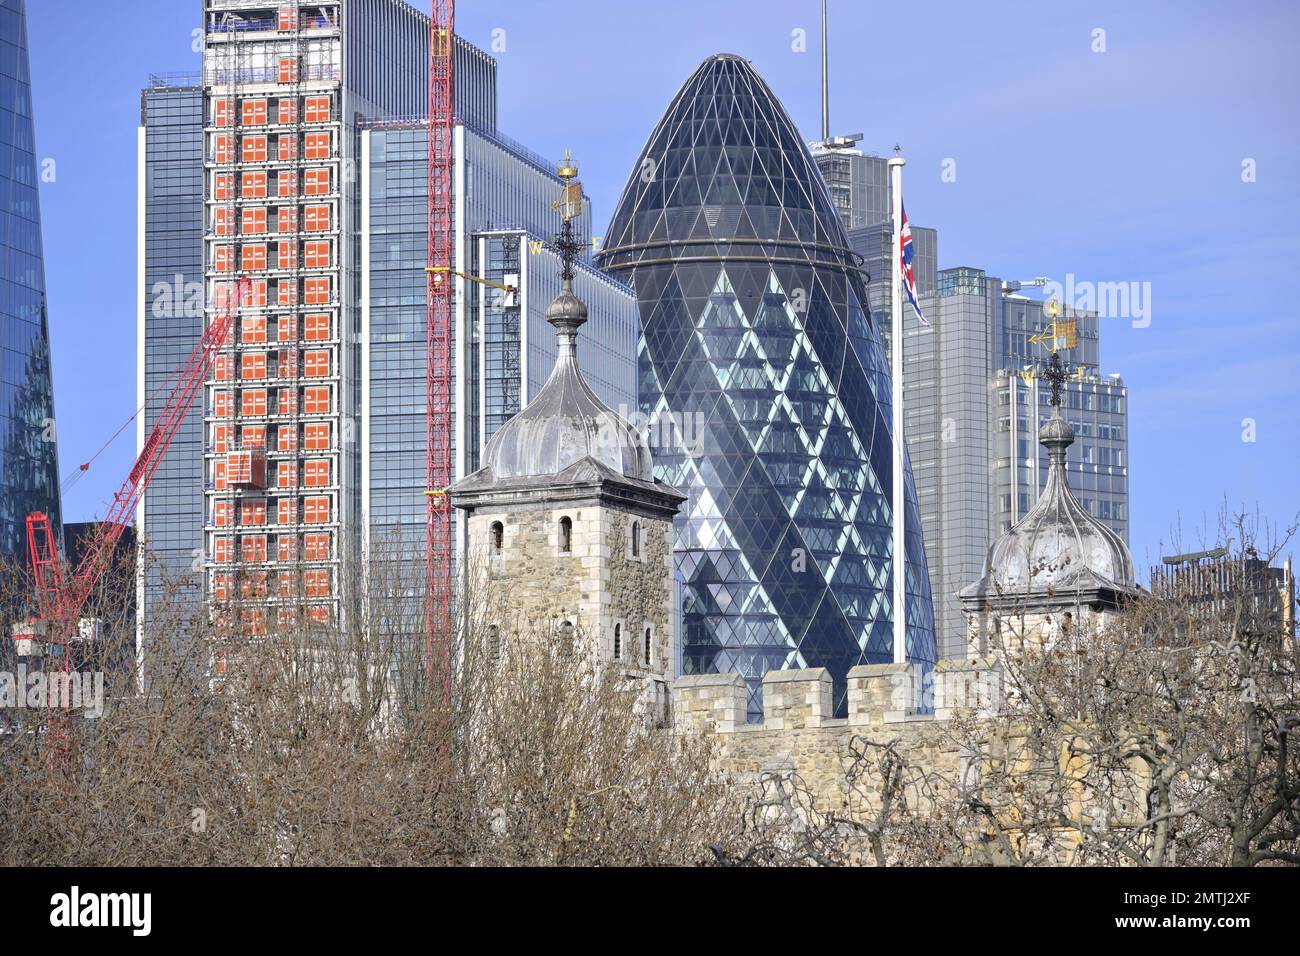 London, England, UK. Old and new architecture. City of London towerblocks behind the Tower of London Stock Photo